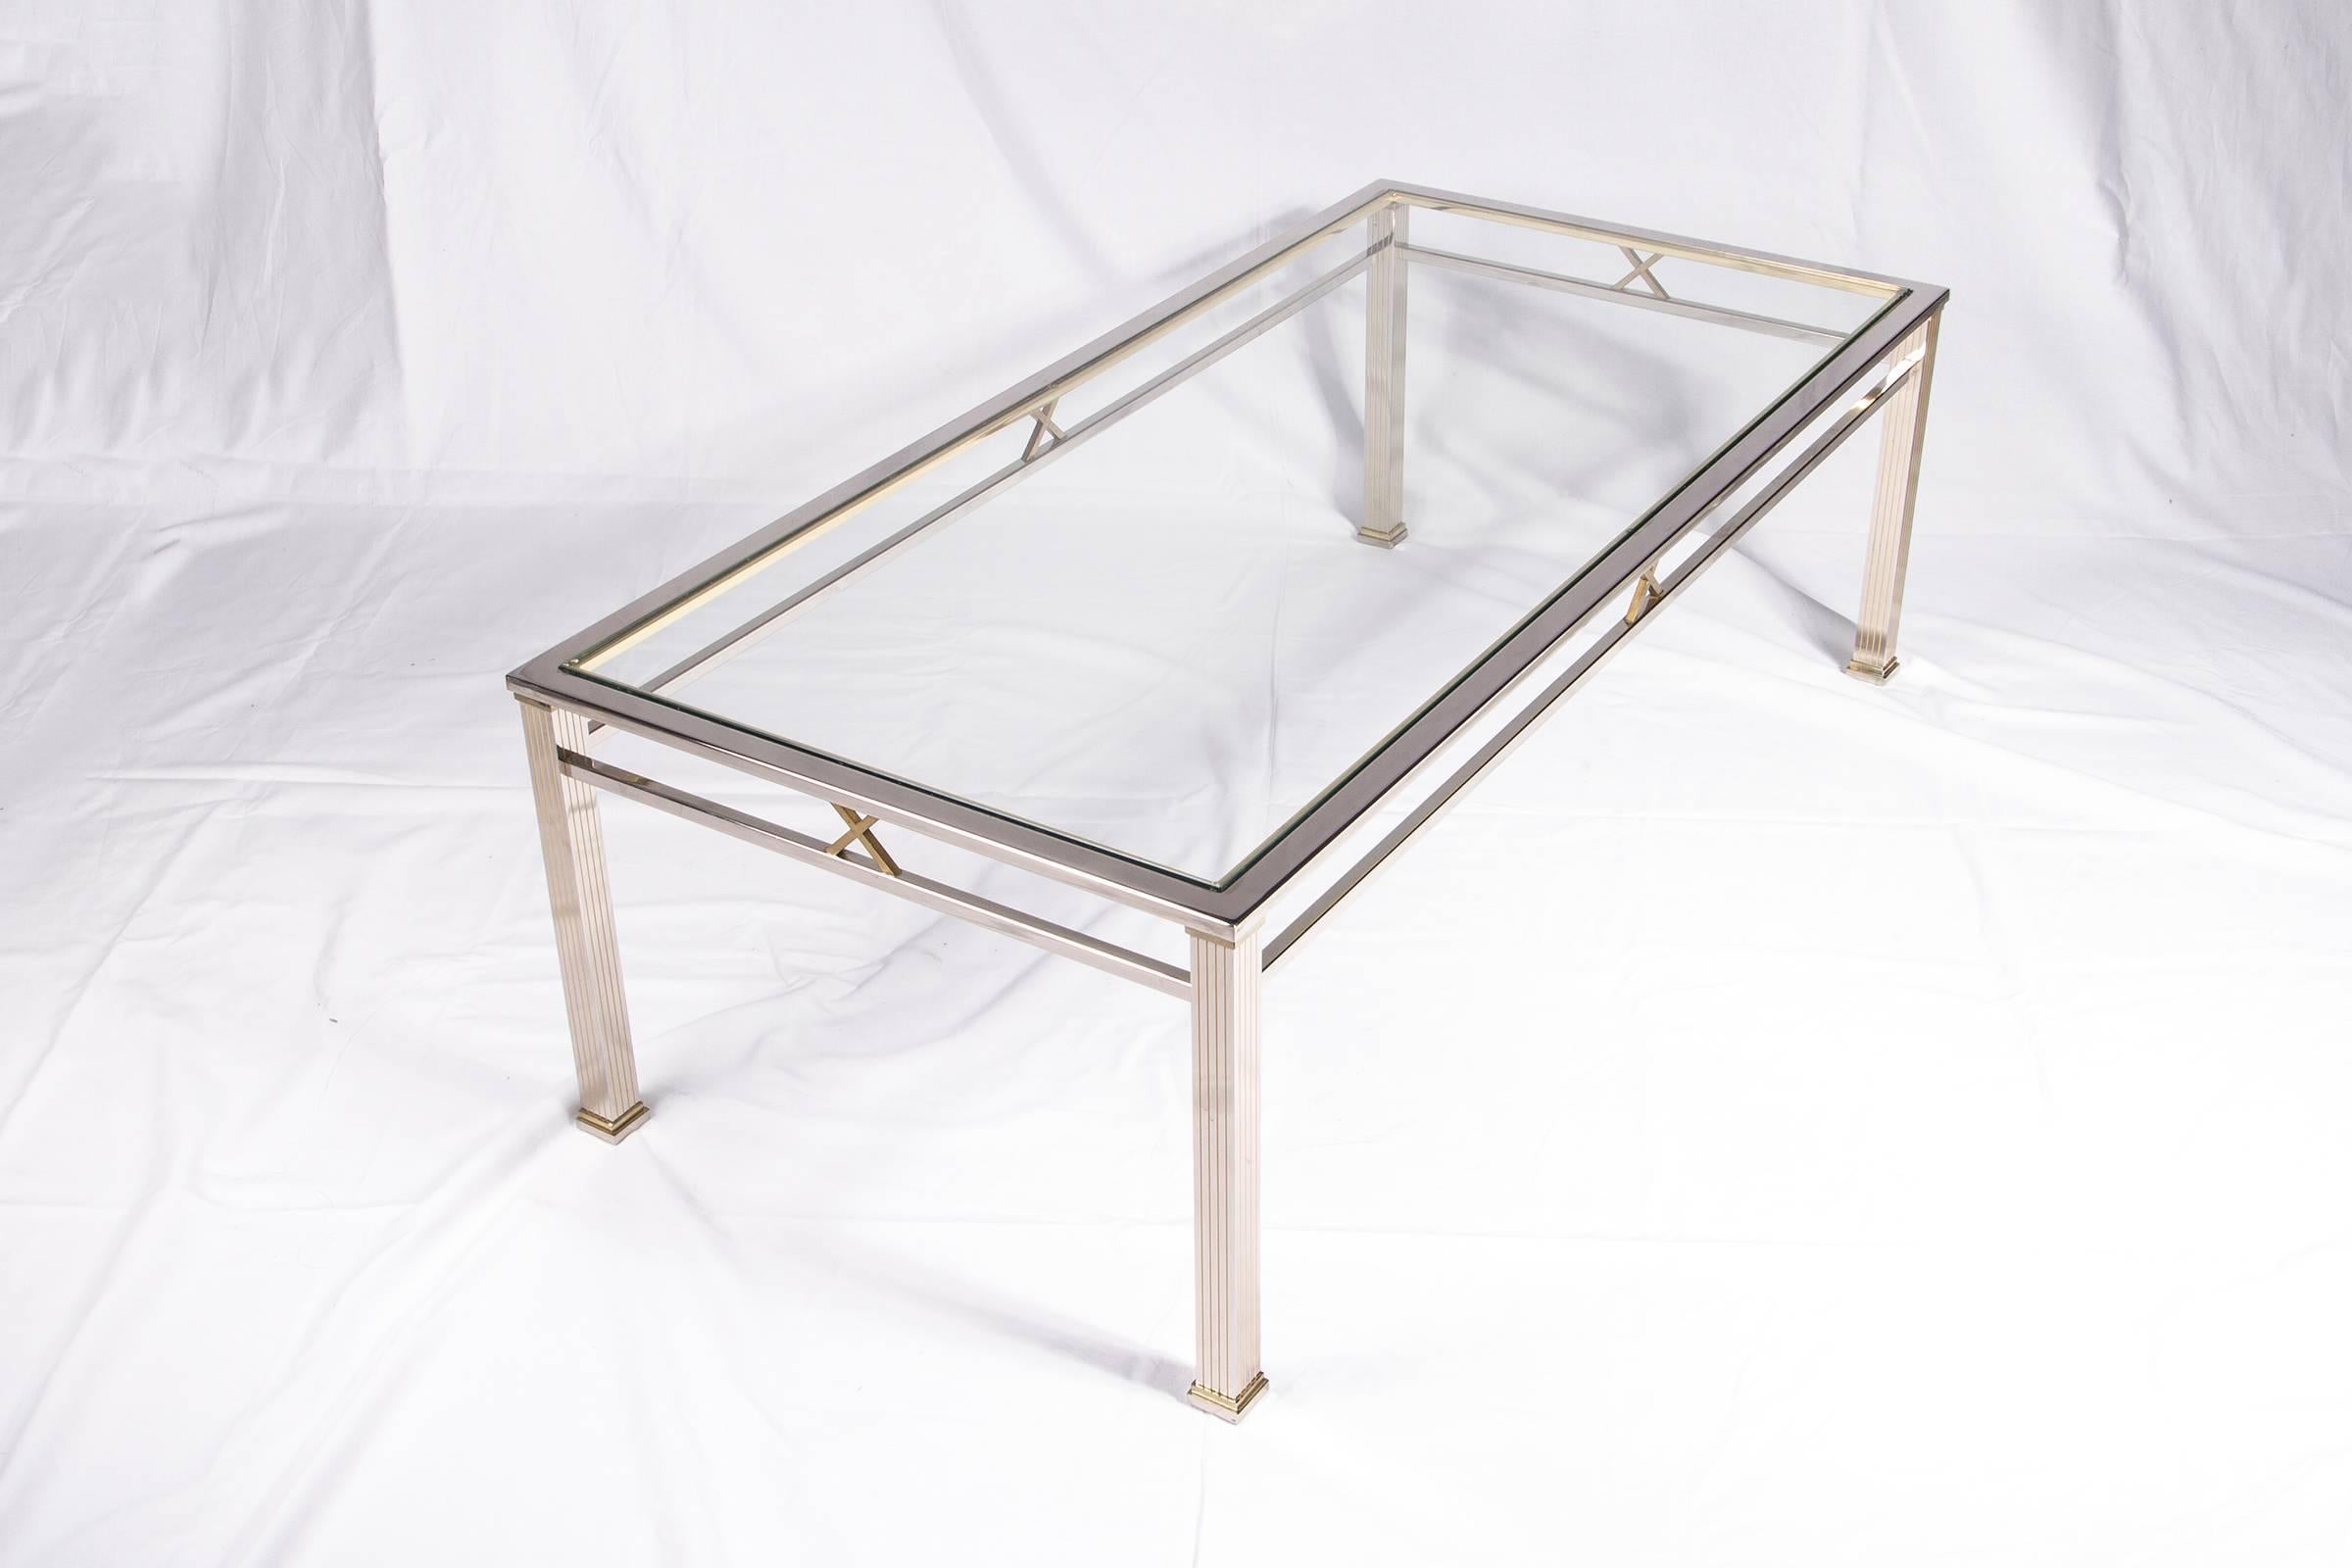 Mid-20th century chrome and glass coffee table by Belgochrome.

Please contact us for delivery details.